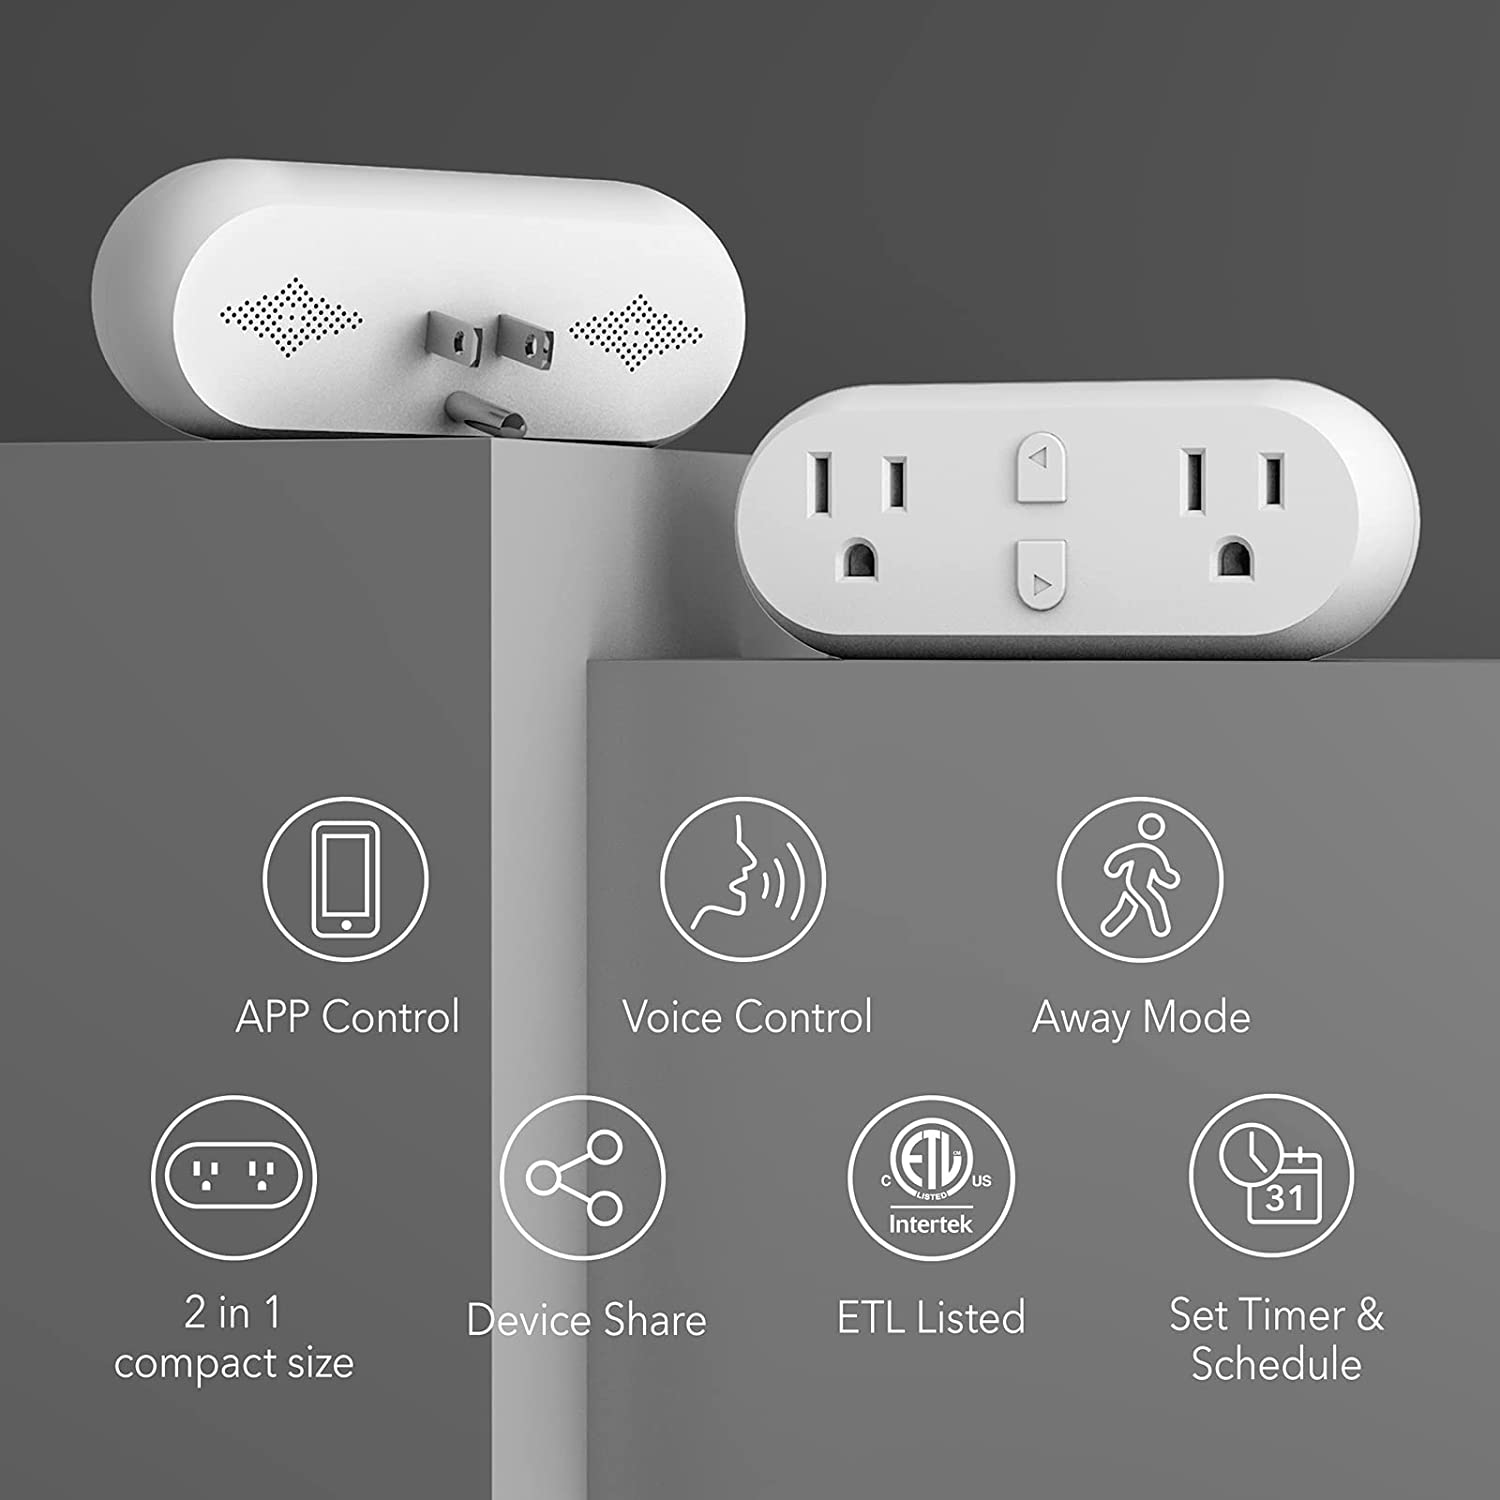 Bluetooth Mesh Smart Plugs Remote Outlets Voice Control 2 Pack& 4 Pack BN-LINK 4 Pieces